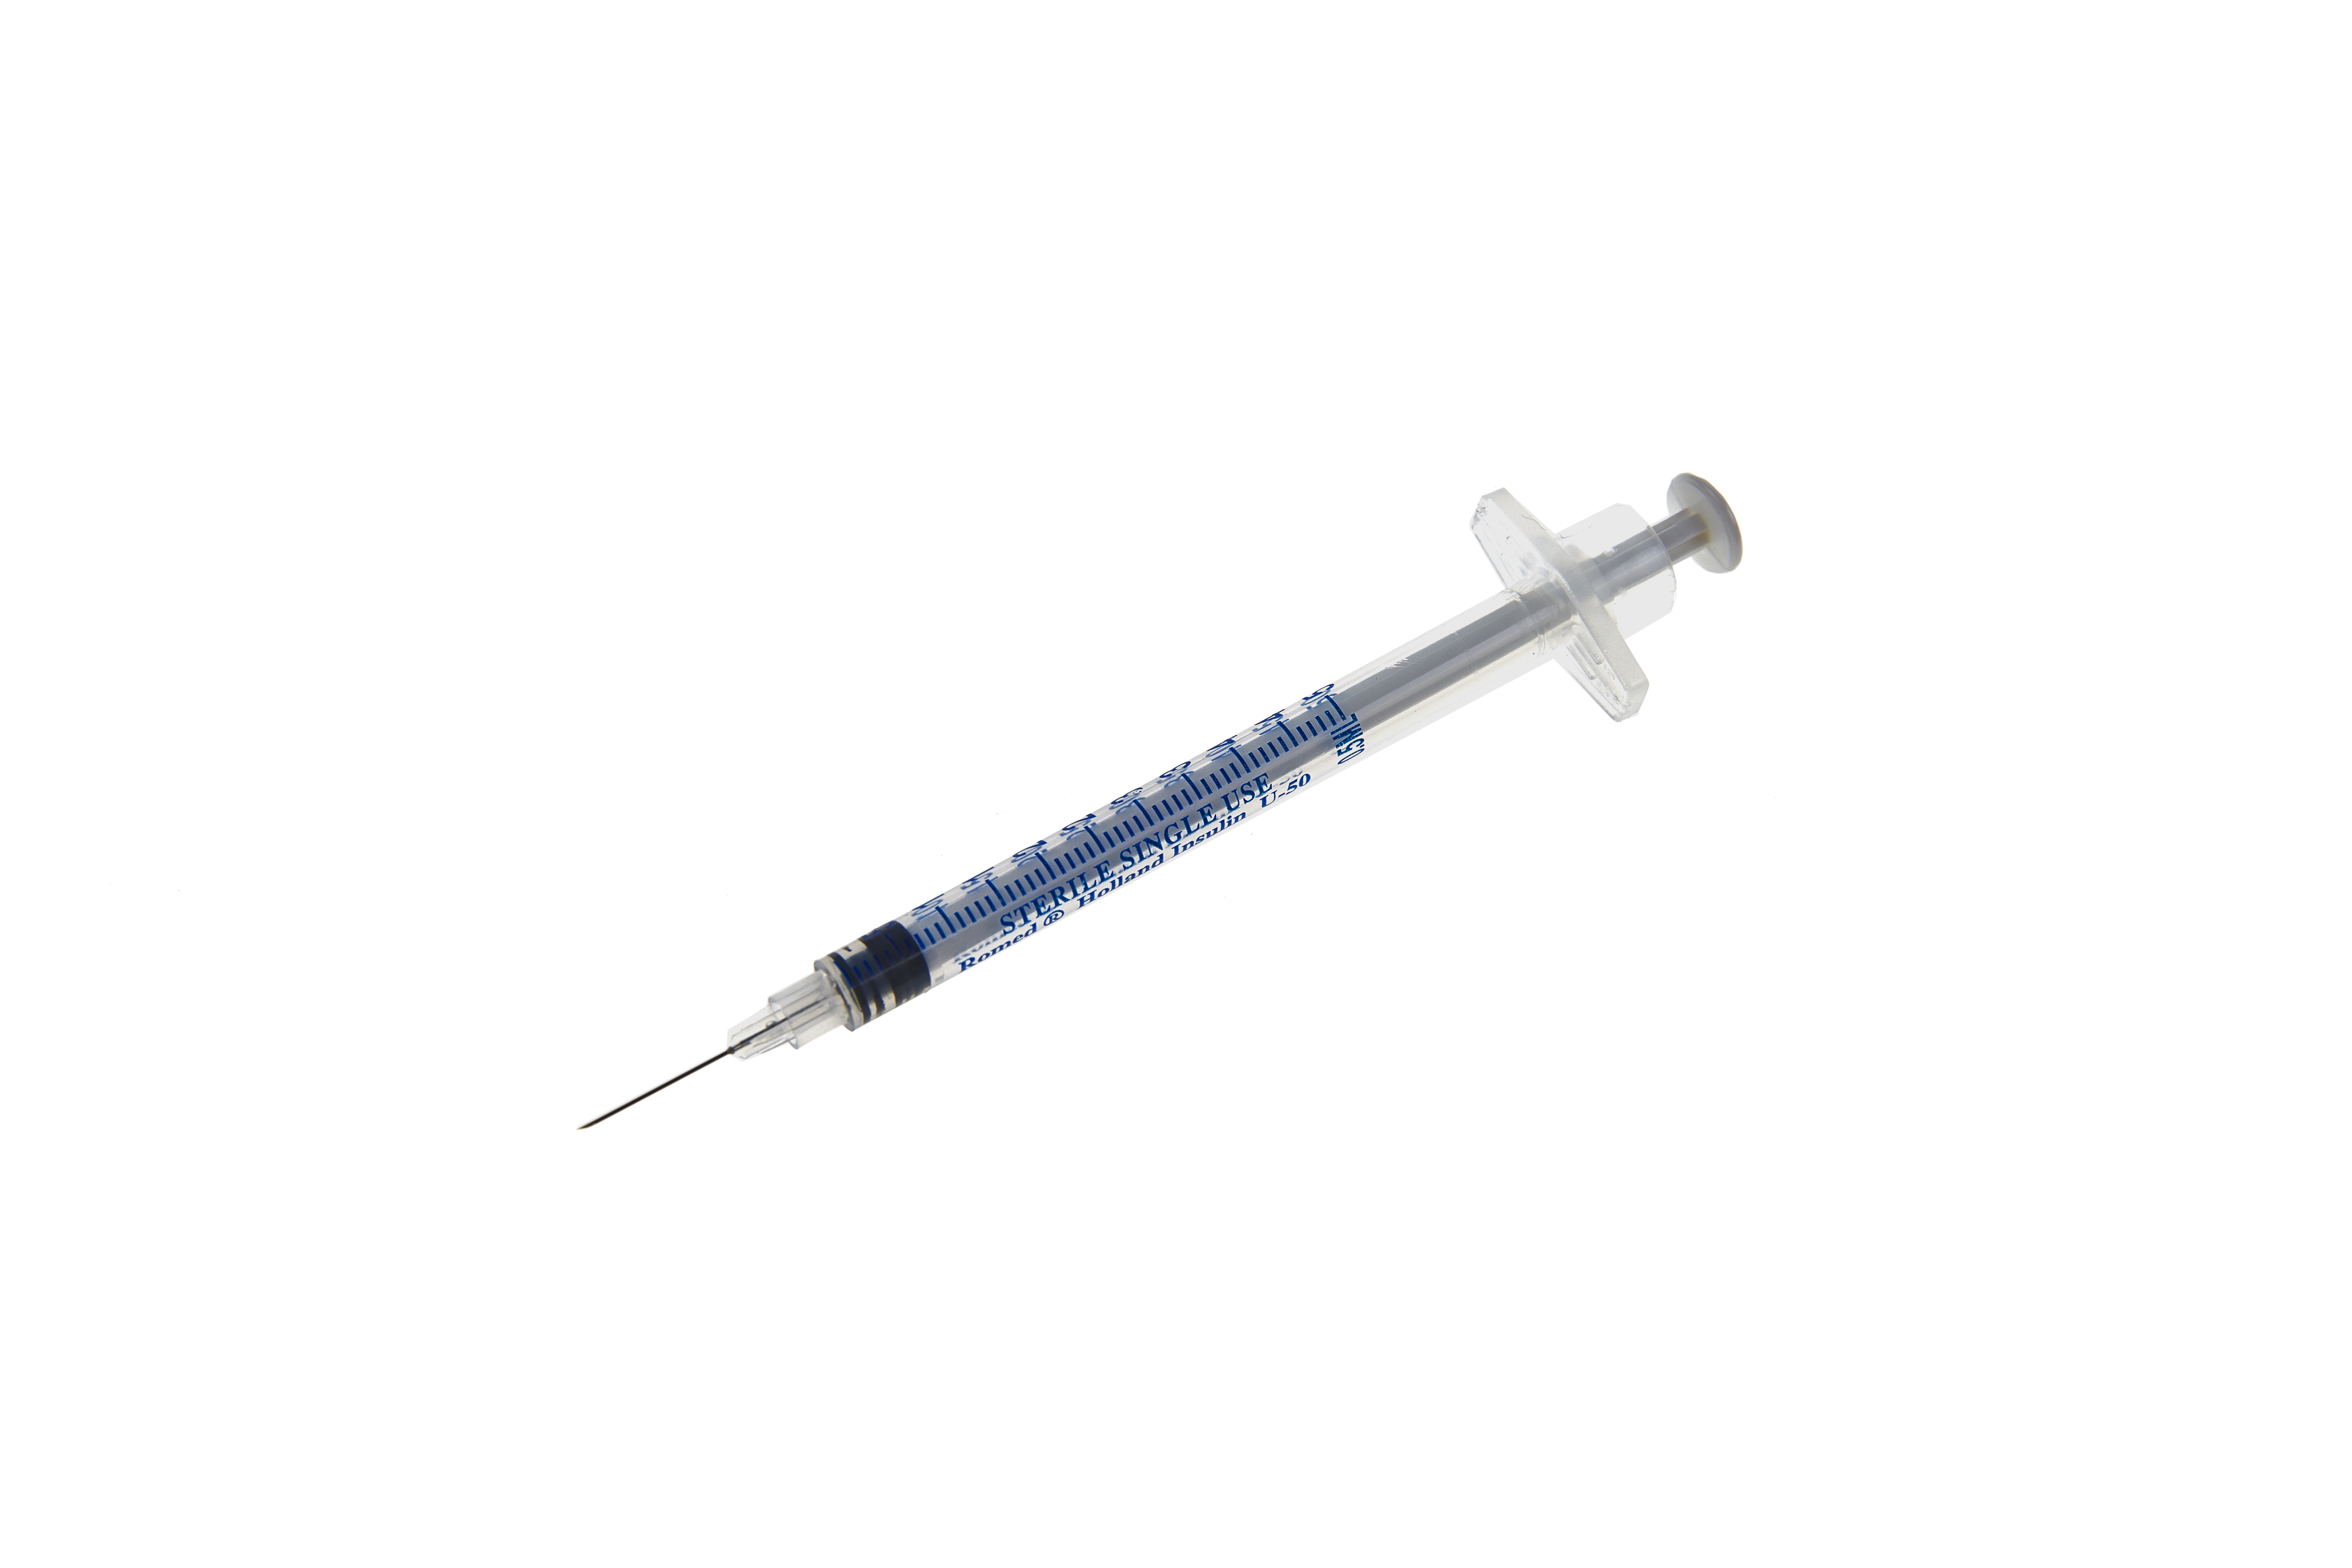 3IS-0.5ML-50U Romed insulin syringes 0.5 ml with integrated needle, 50 units, sterile per piece, 100 pieces in an inner box, 32 x 100 pcs = 3.200 pcs in a carton.